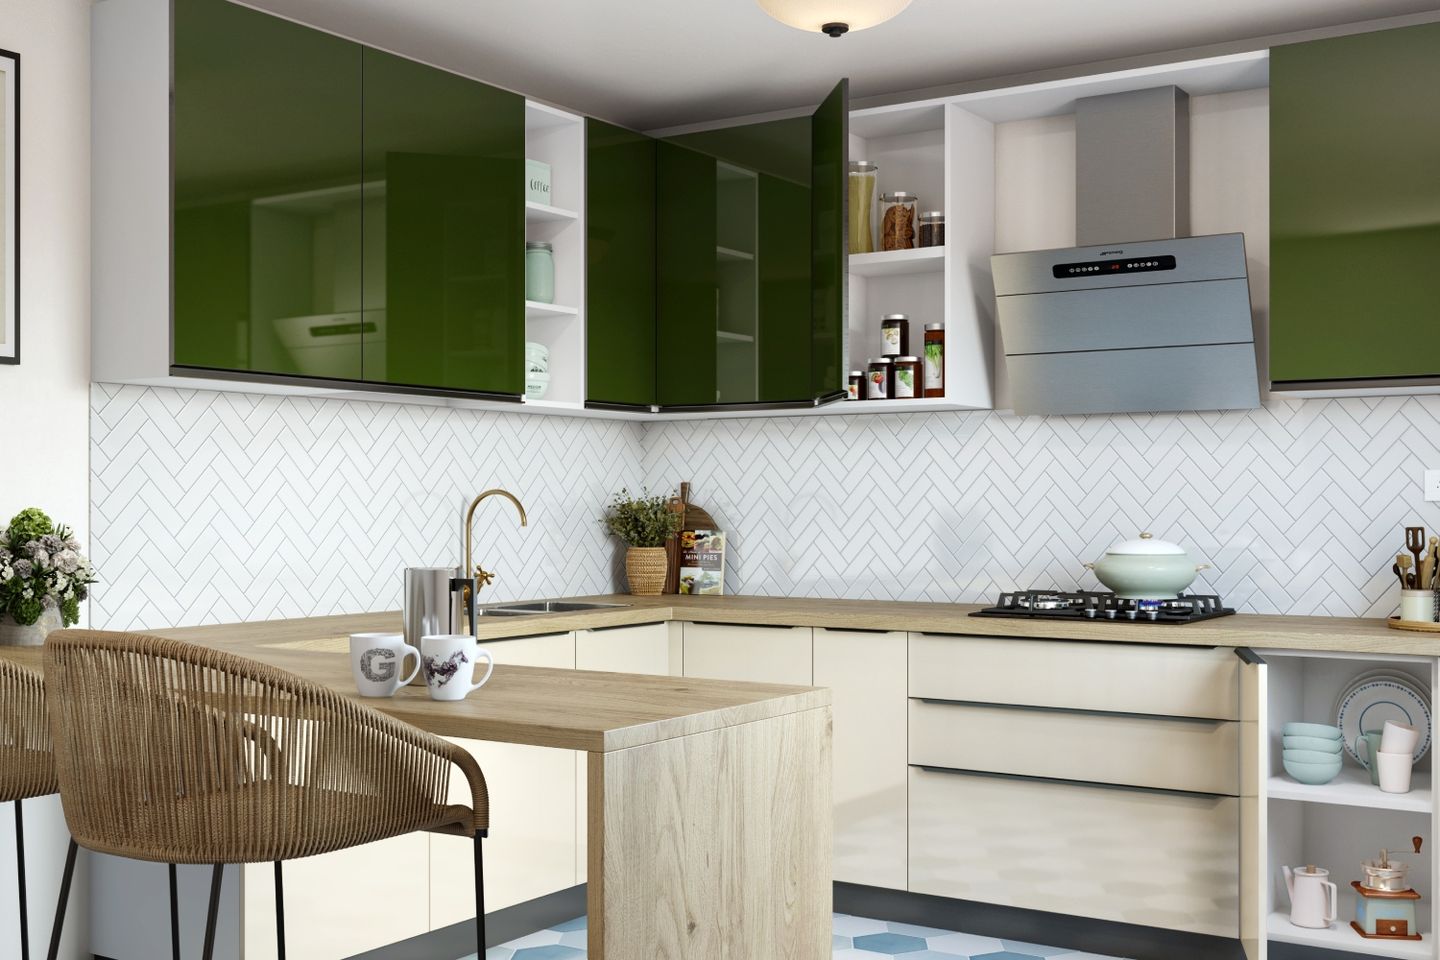 White Rectangular Herringbone Kitchen Tile Design With Tropical Green And Wood Cabinets - Livspace